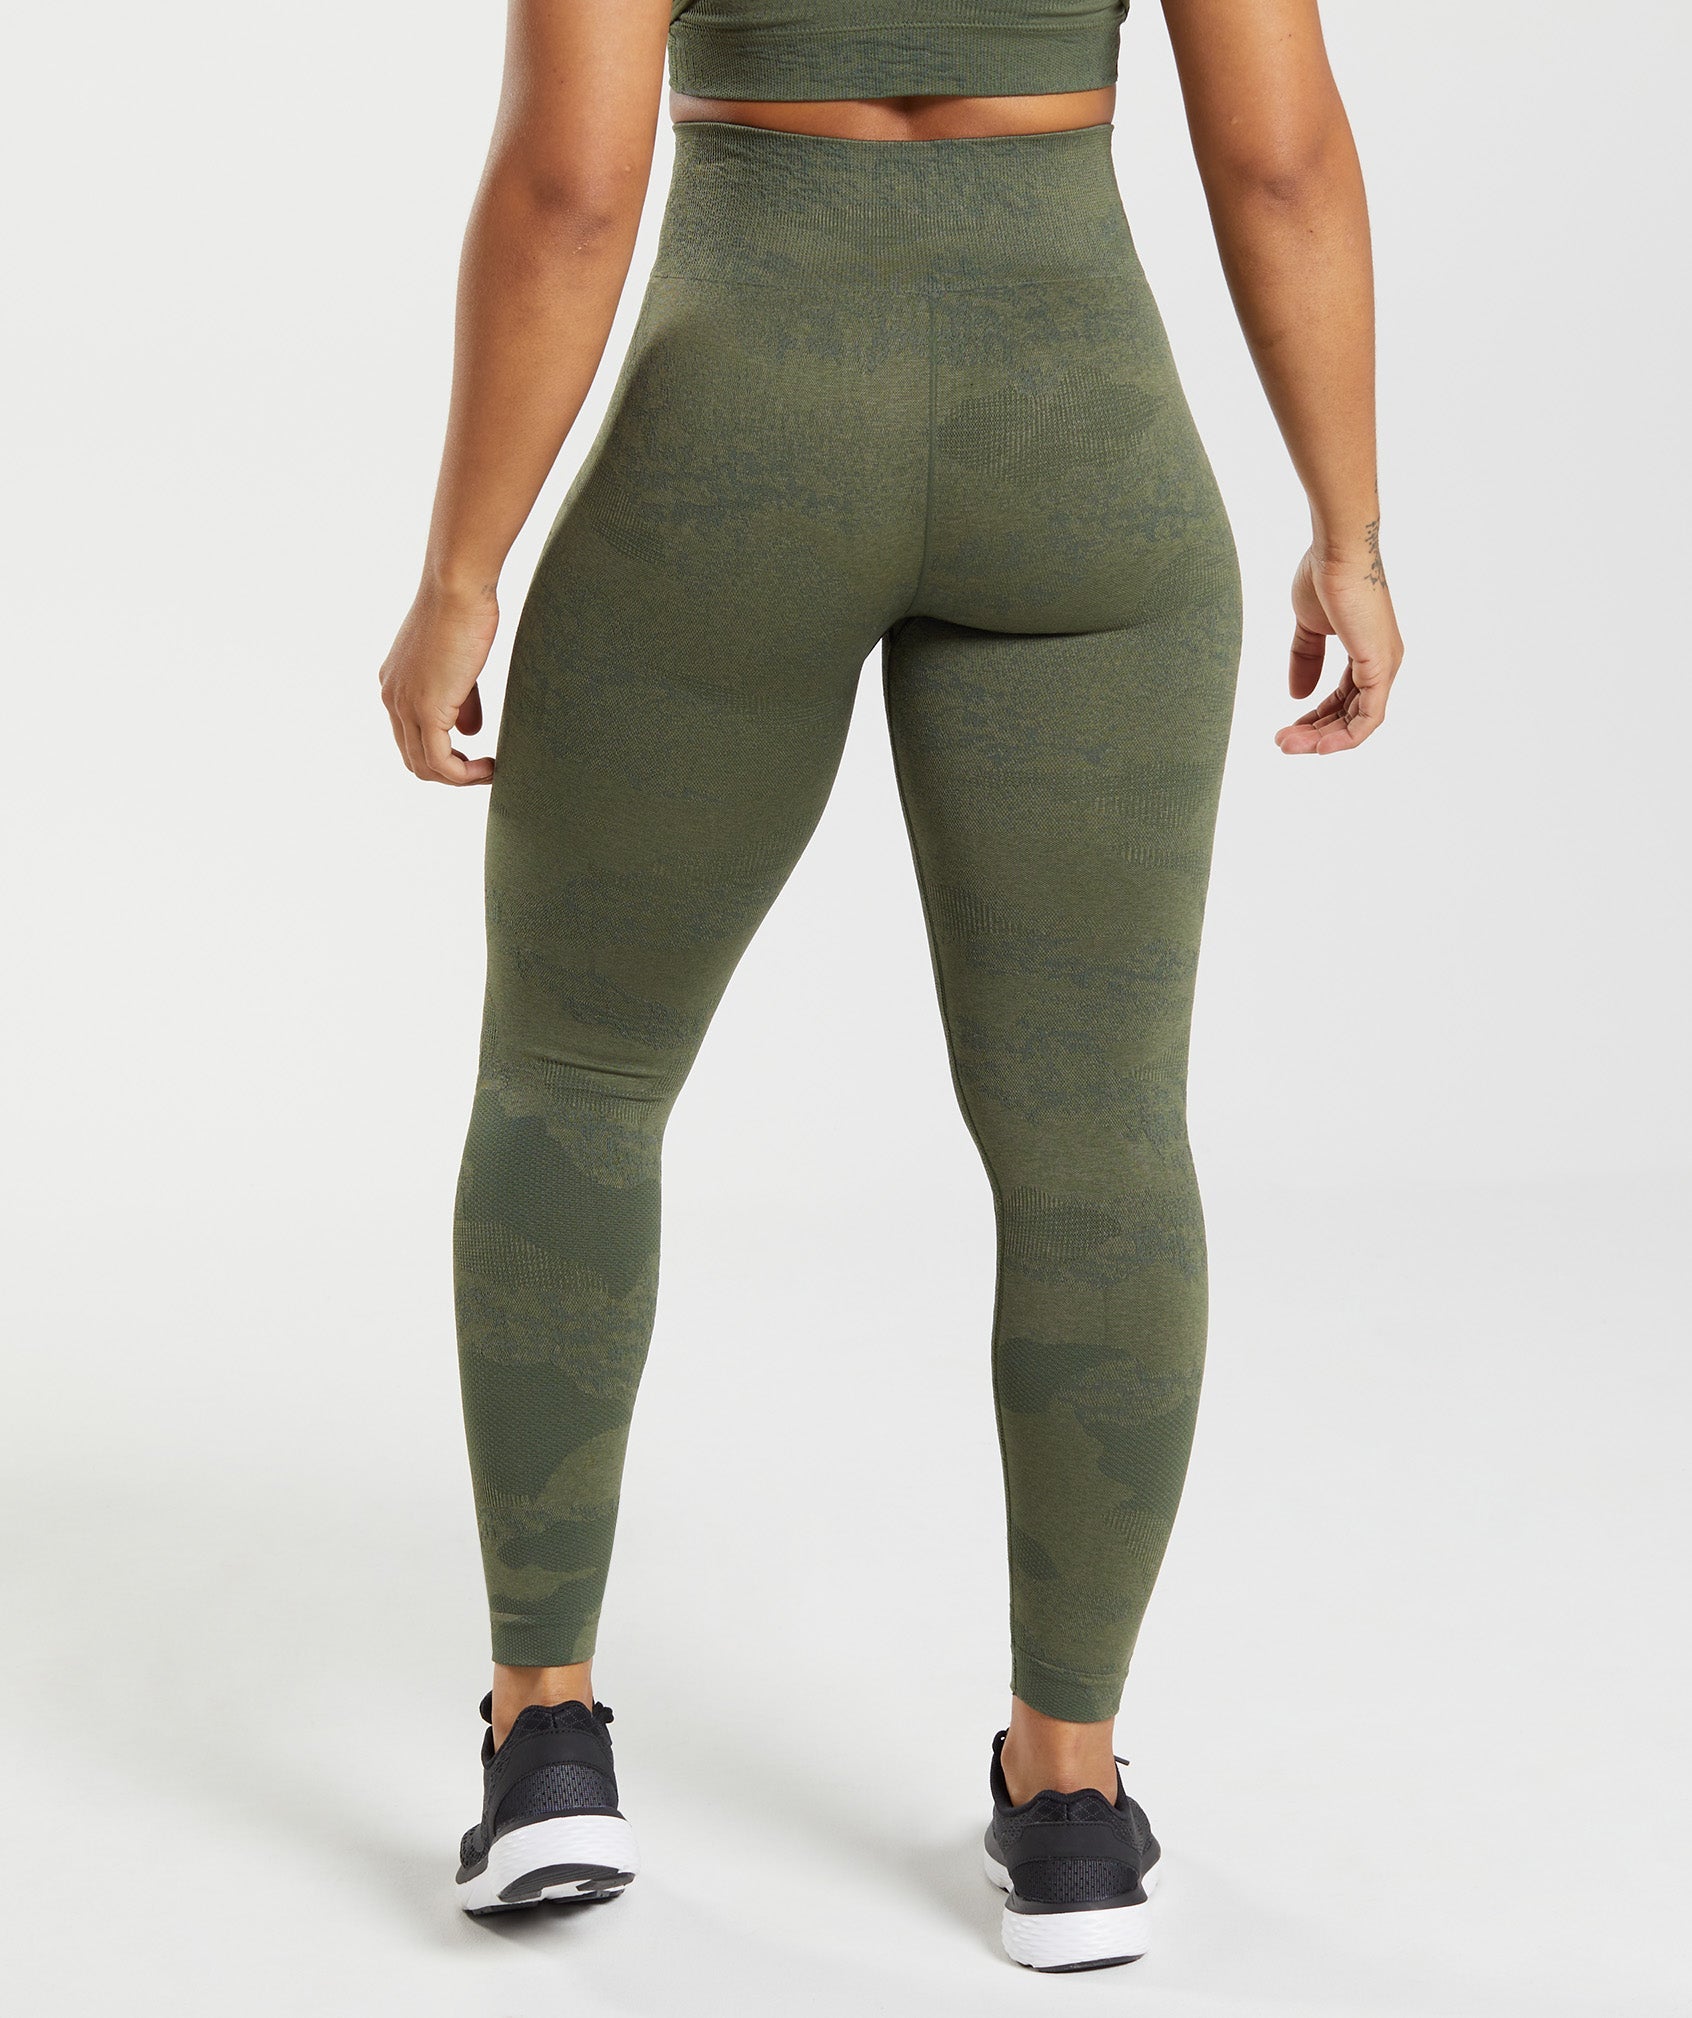 Adapt Camo Seamless Leggings in Moss Olive/Core Olive - view 2